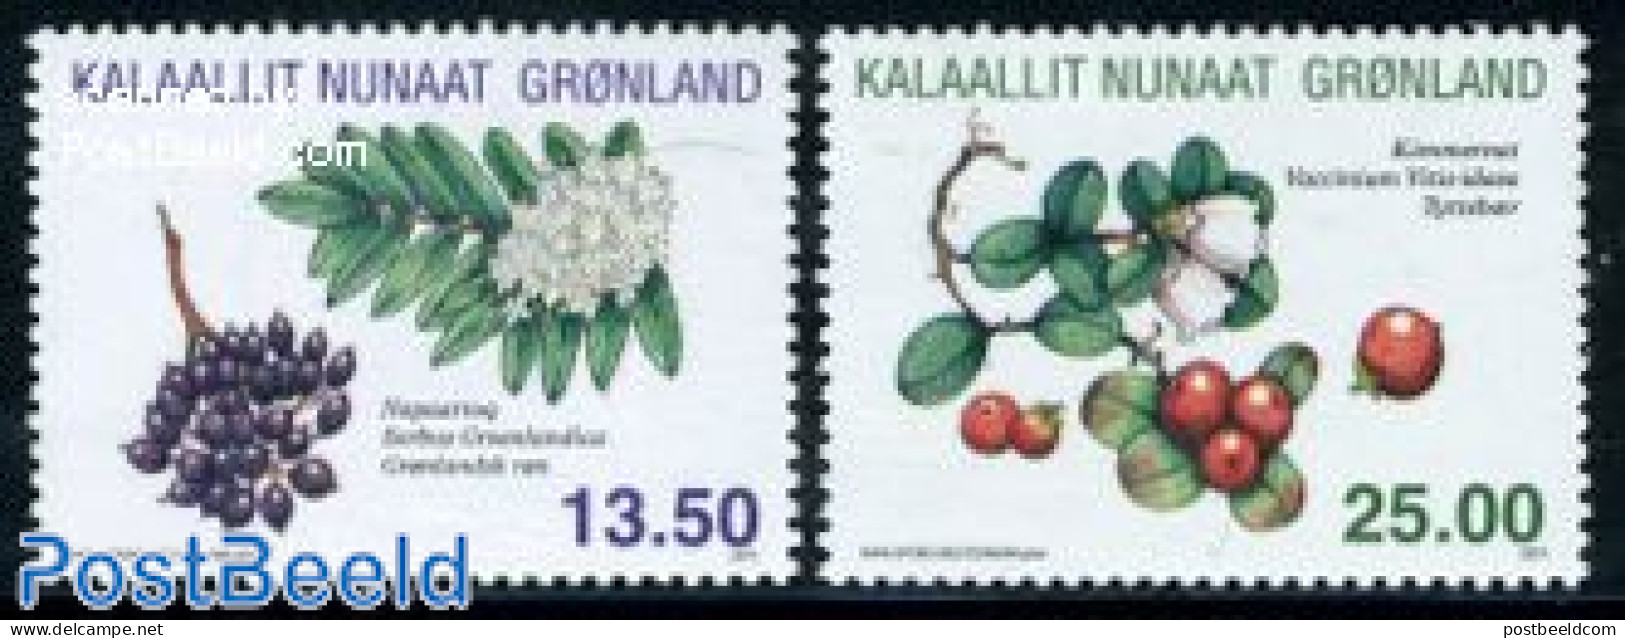 Greenland 2011 Herbs 2v, Mint NH, Nature - Flowers & Plants - Fruit - Neufs